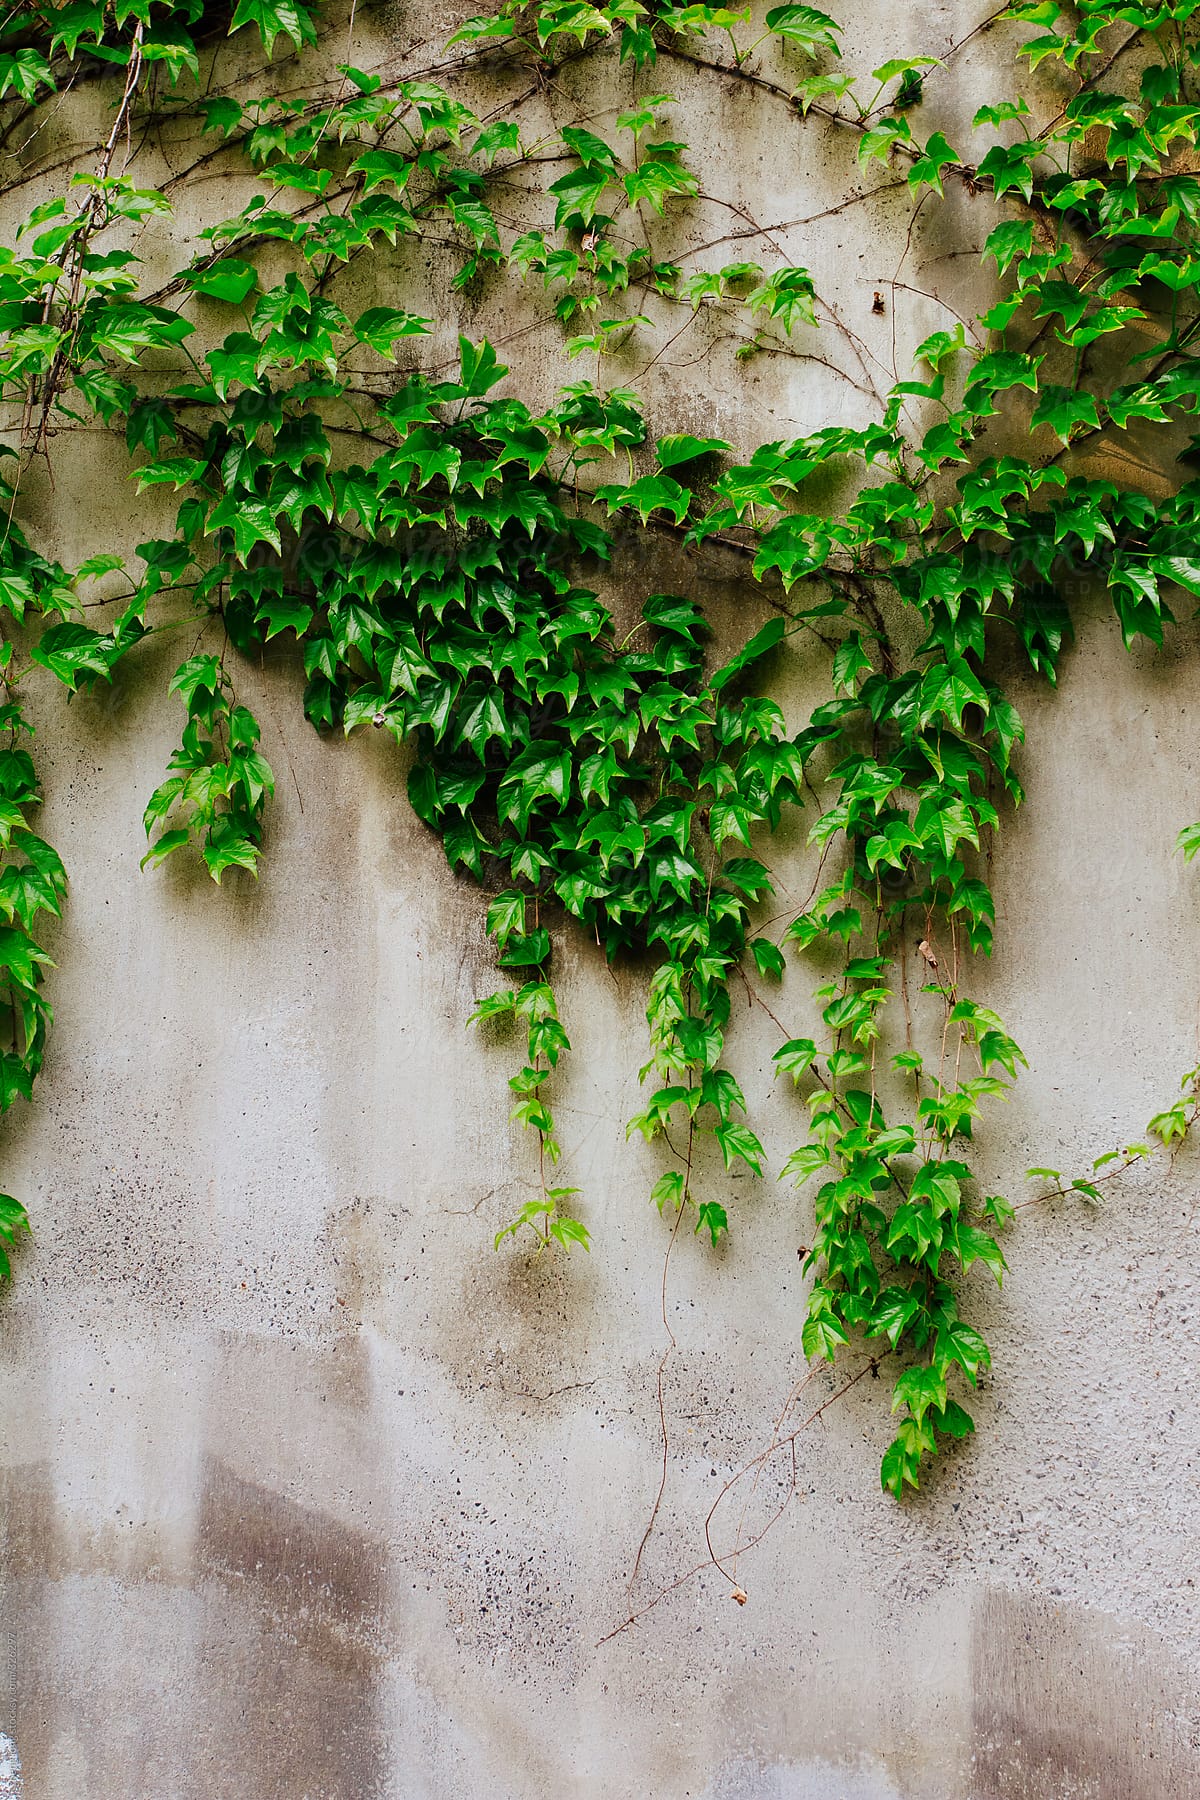 Boston ivy on the wall